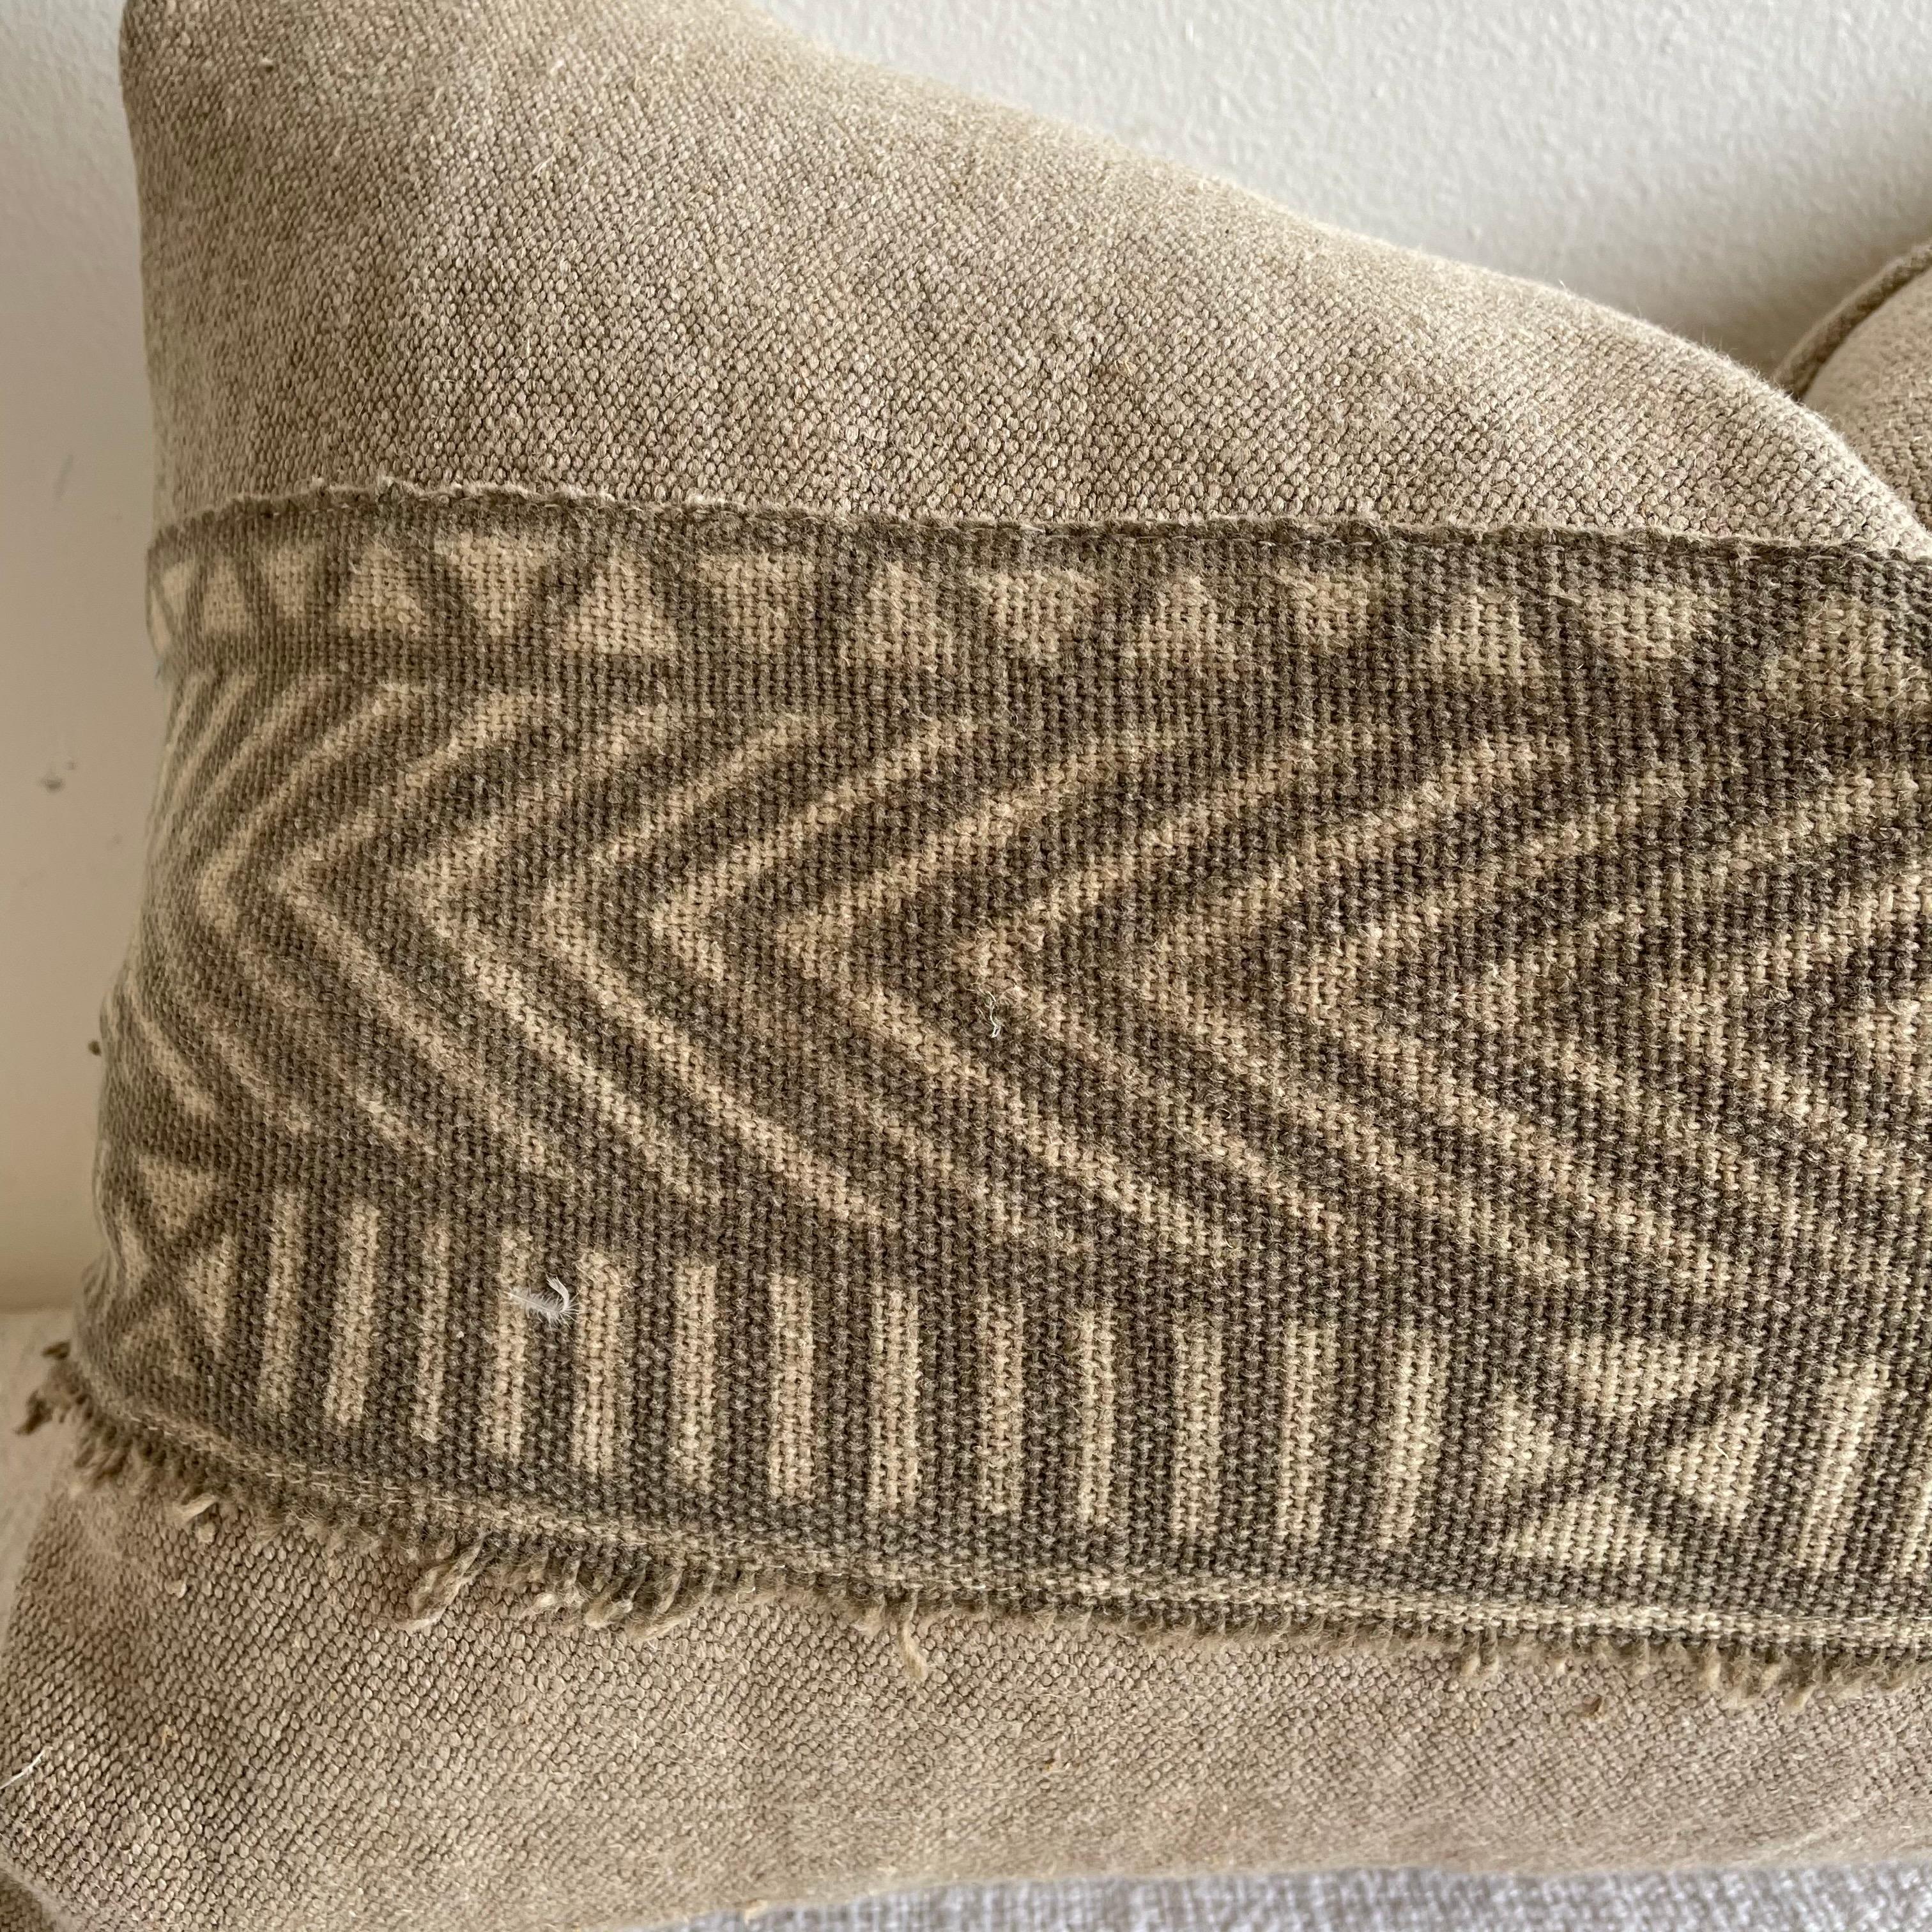 This vintage textile pillow face features a batik trim in the center, natural flax linen colored background with original nubby texture . The backing is 100% Belgian linen in natural linen. Our pillows are constructed with vintage one of a kind